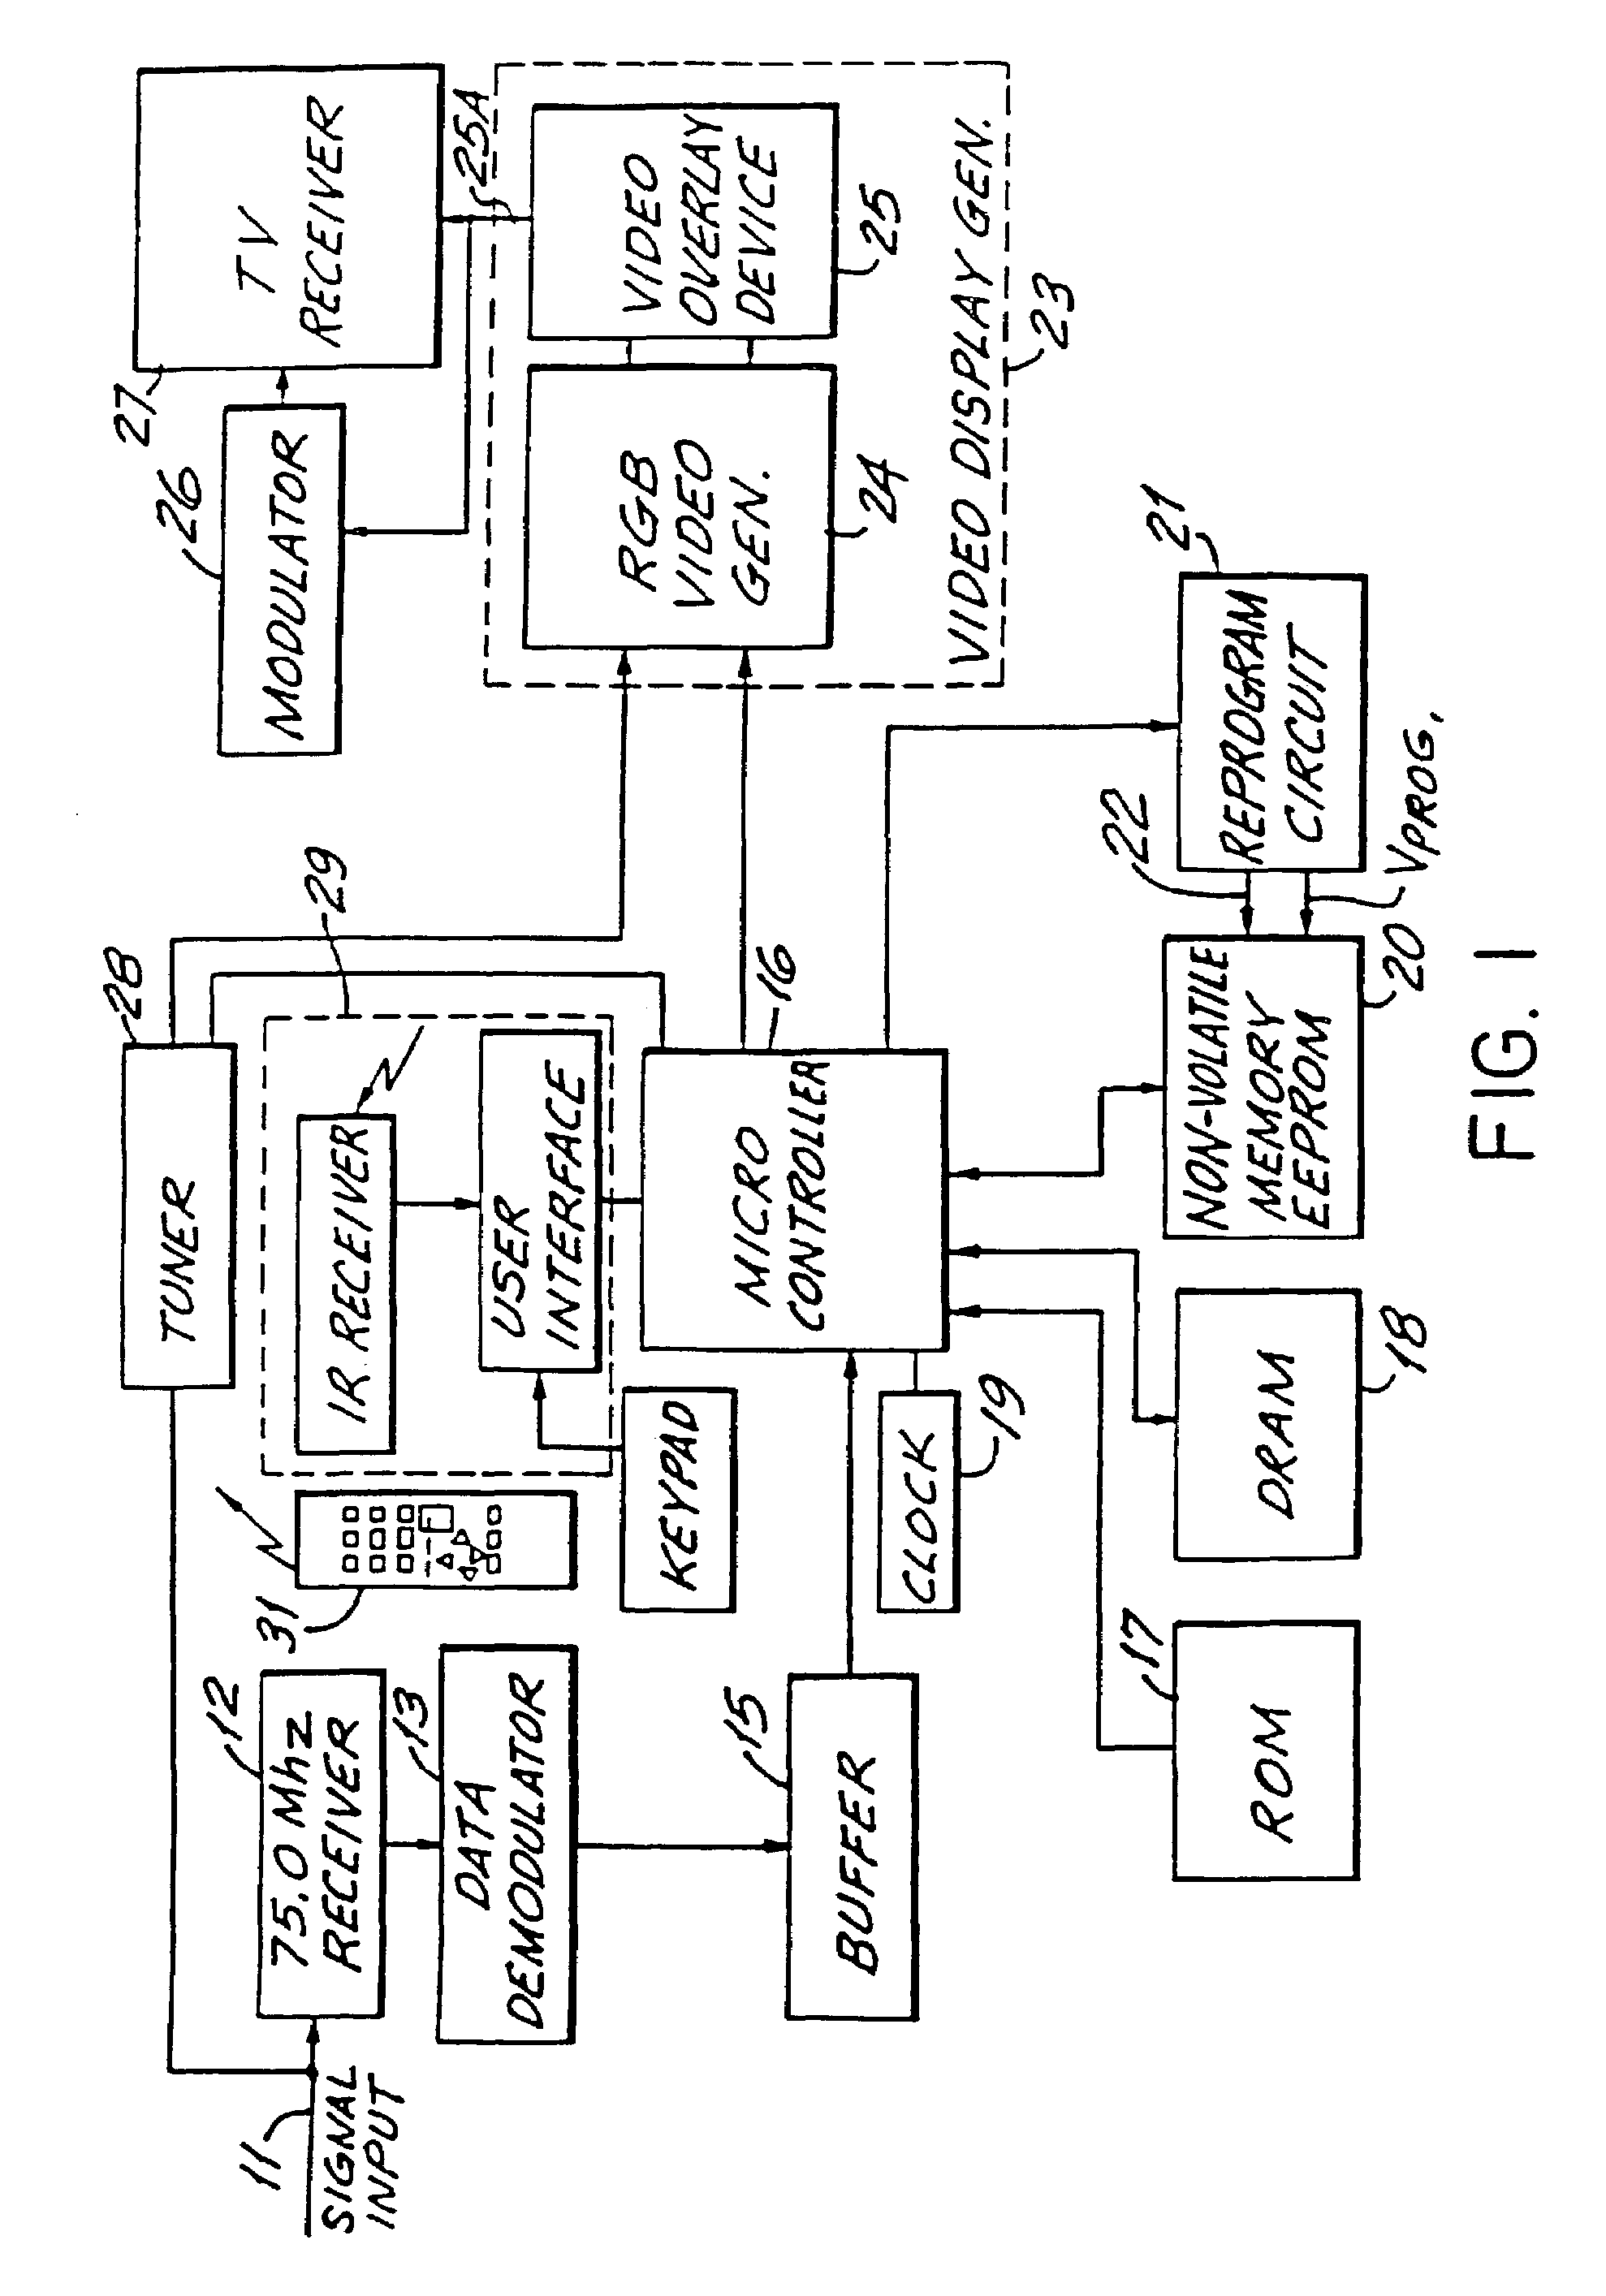 Electronic television program guide schedule system and method